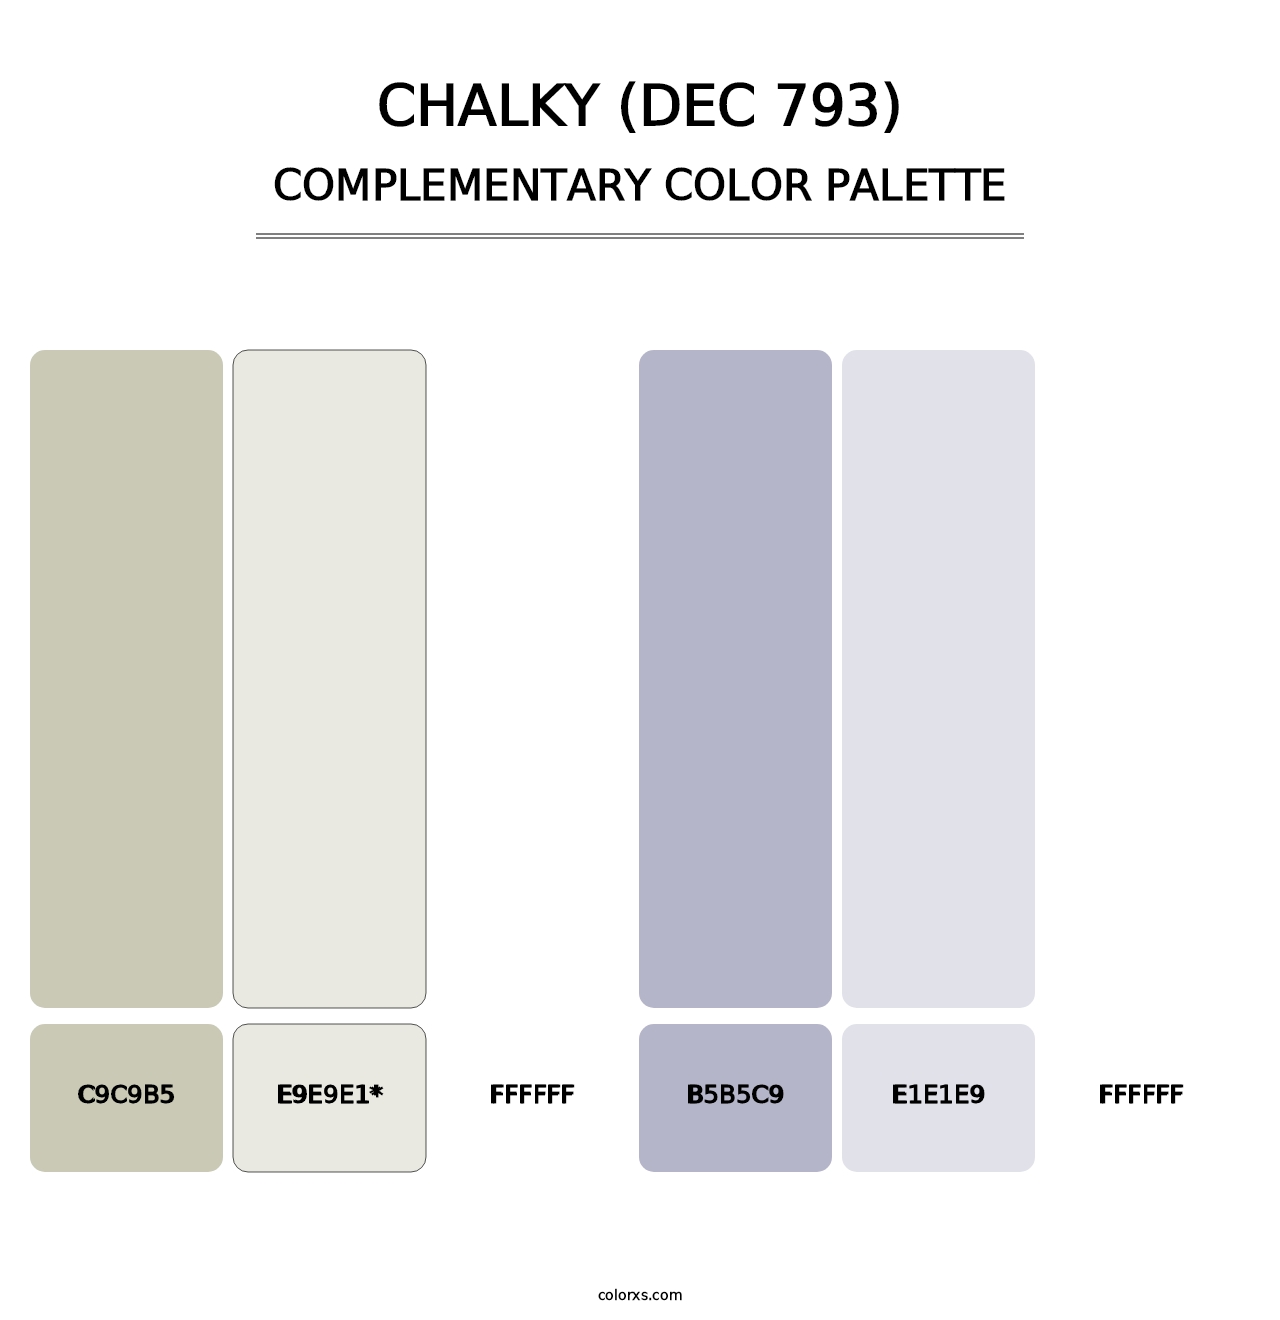 Chalky (DEC 793) - Complementary Color Palette